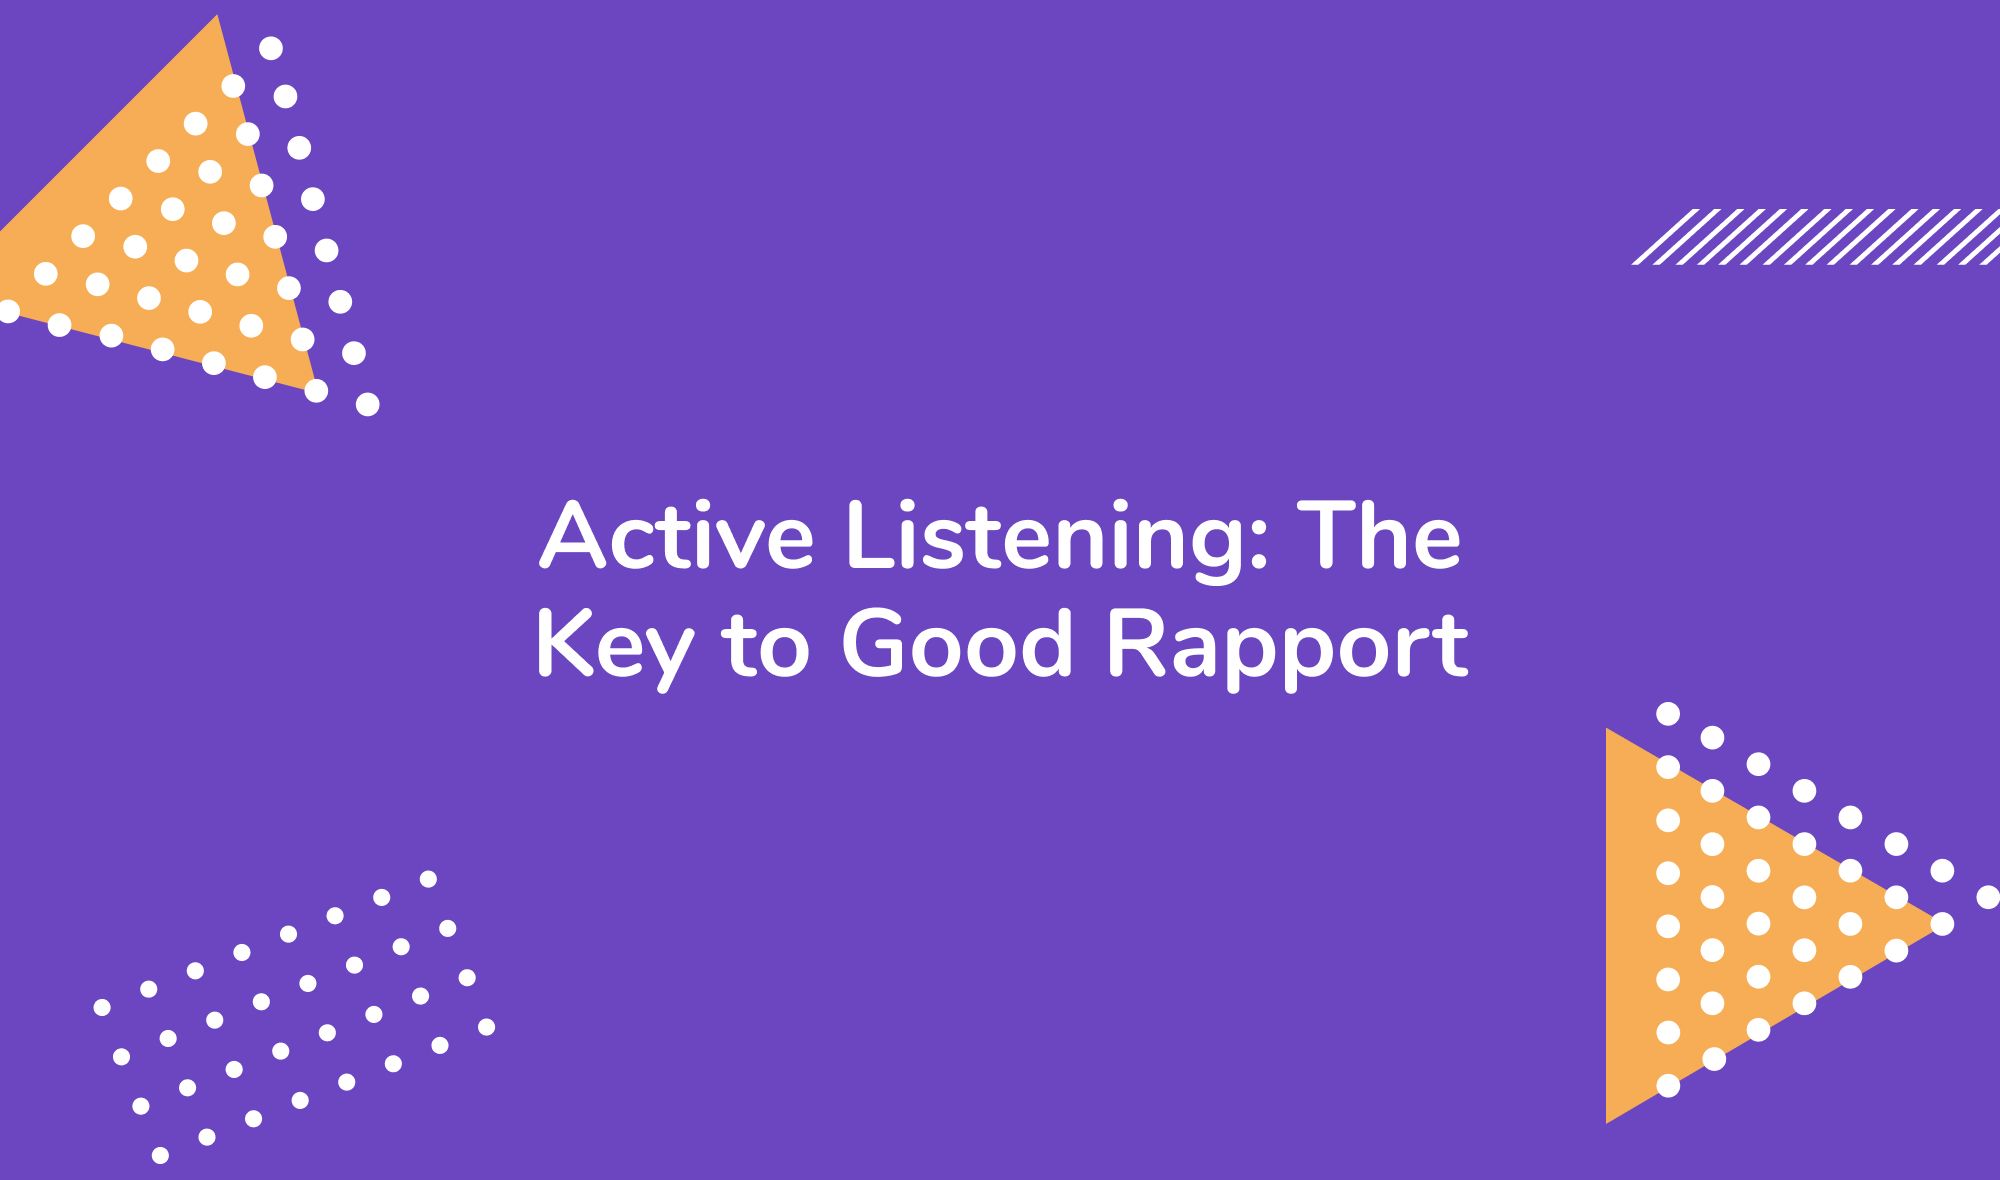 Active Listening: The Key to Good Rapport